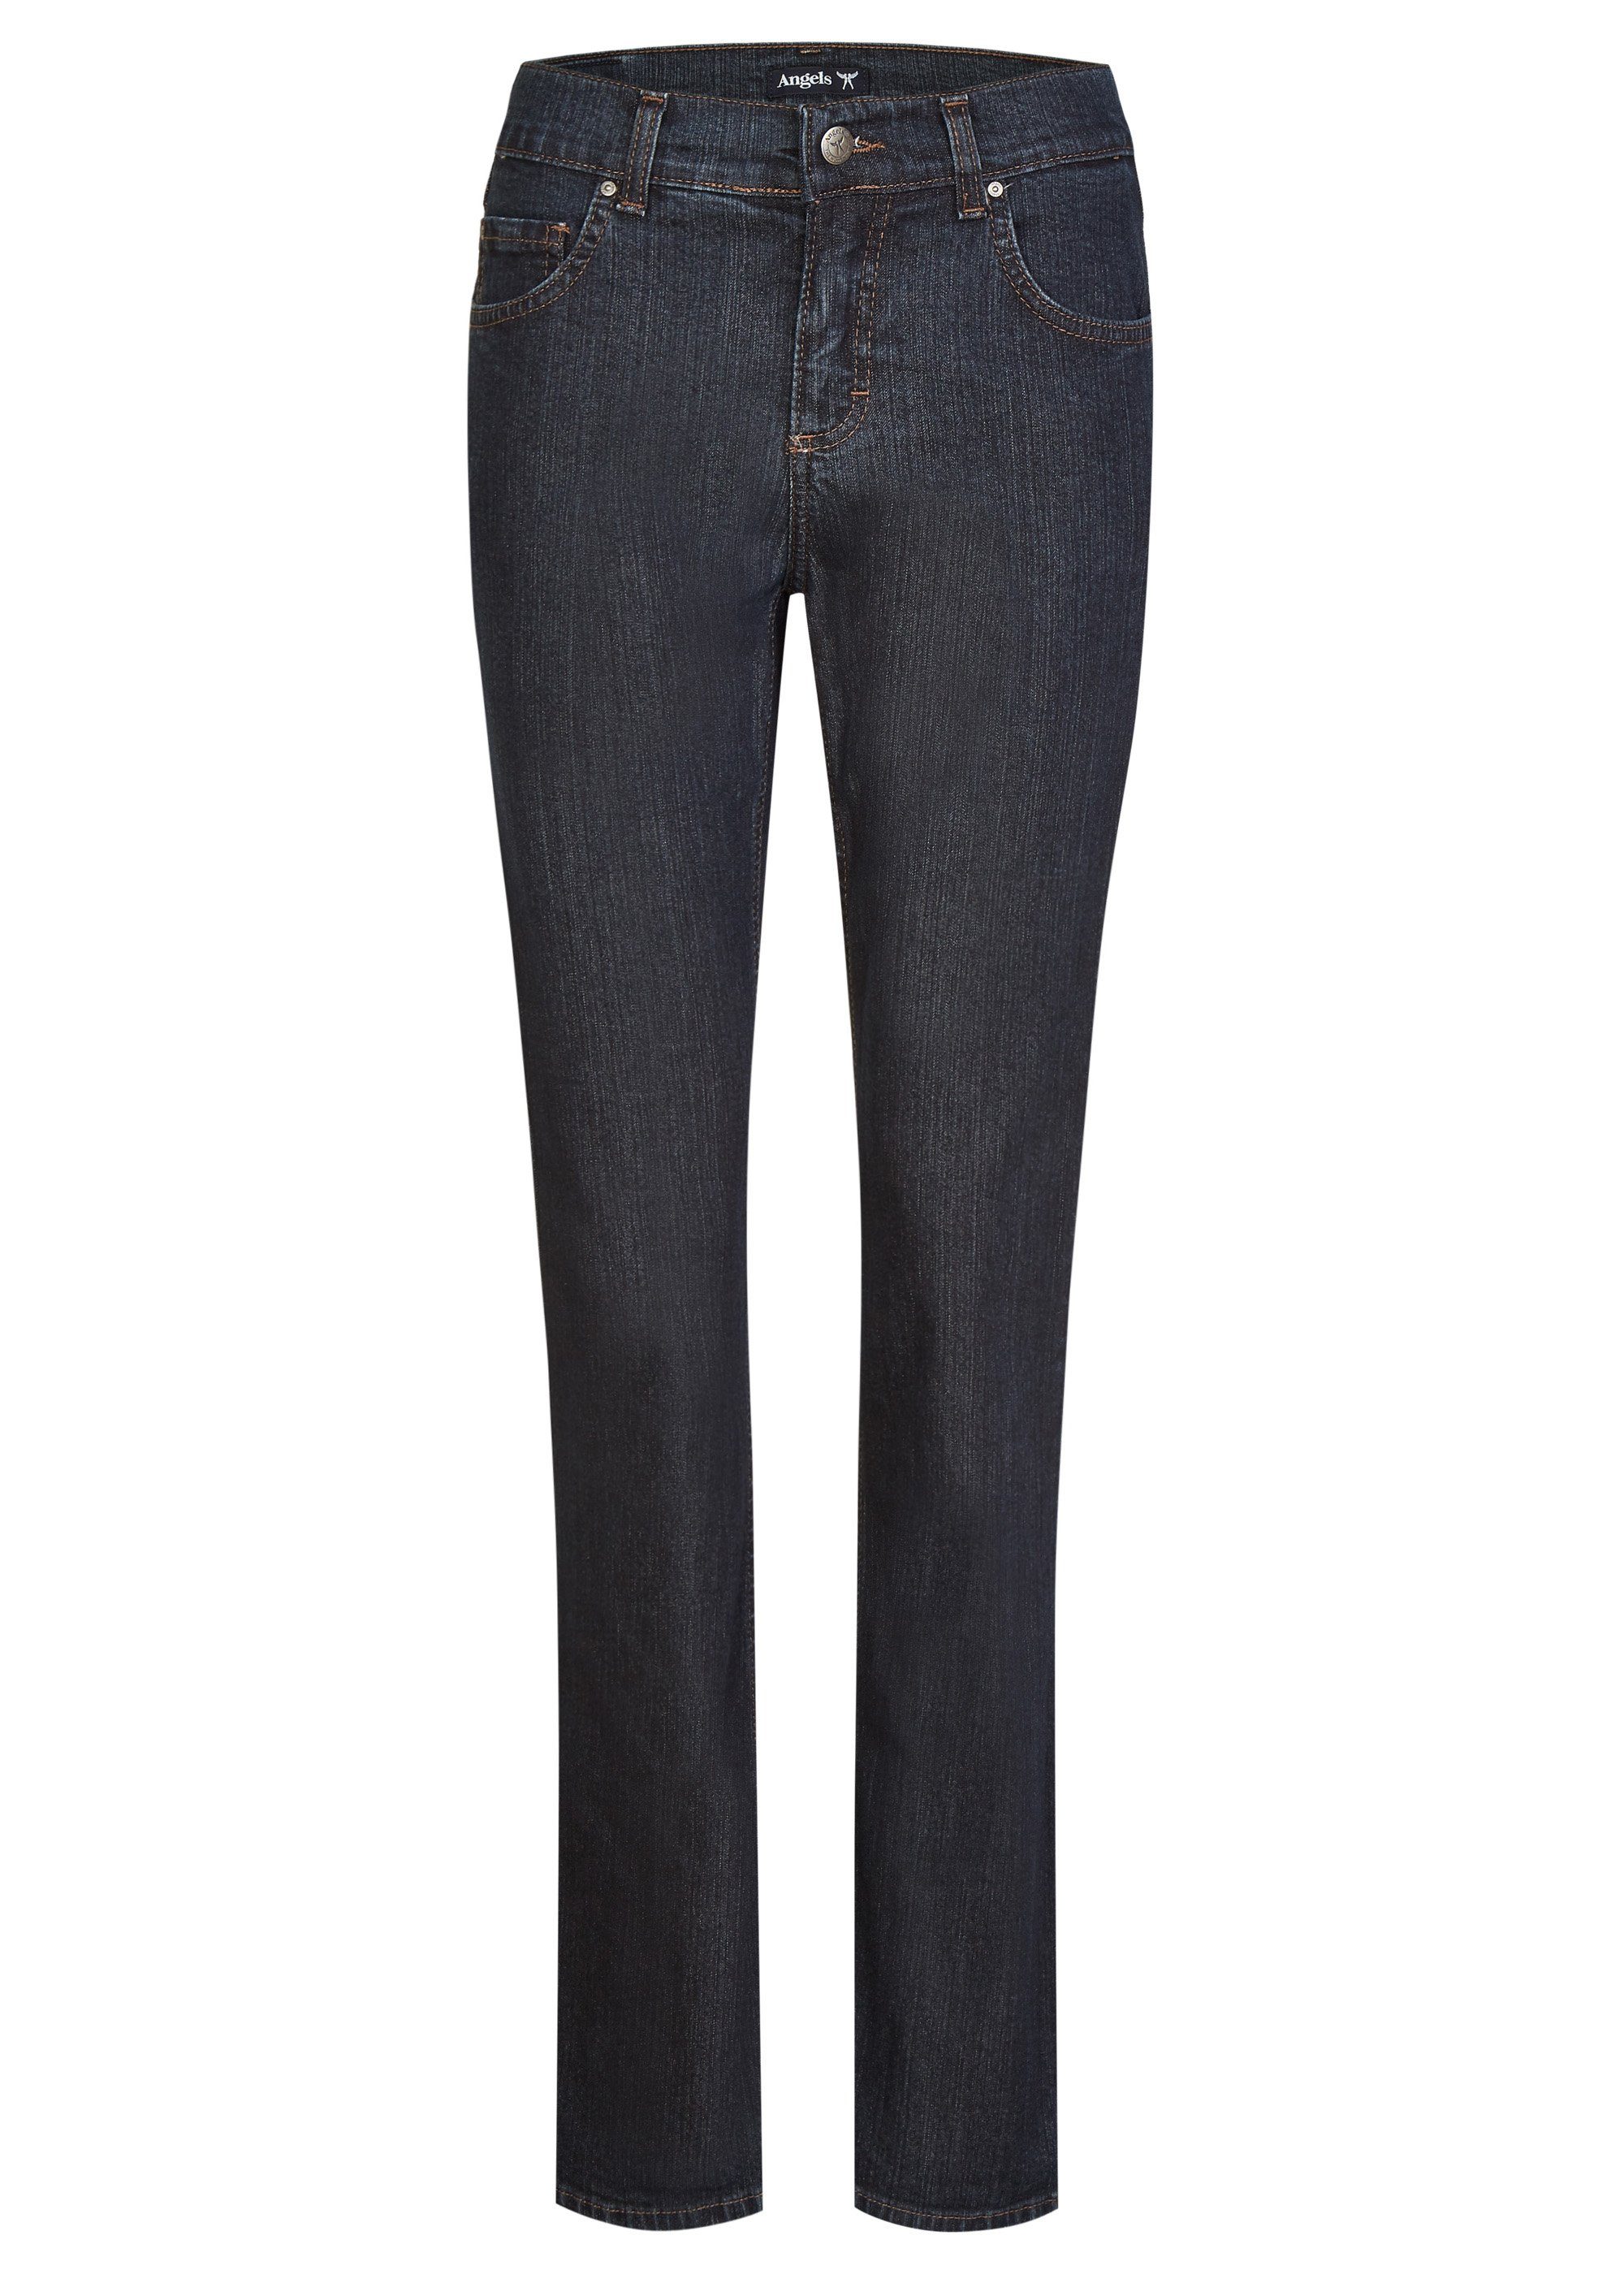 ANGELS Stretch-Jeans ANGELS JEANS LUCI 90.30 blue 53 night